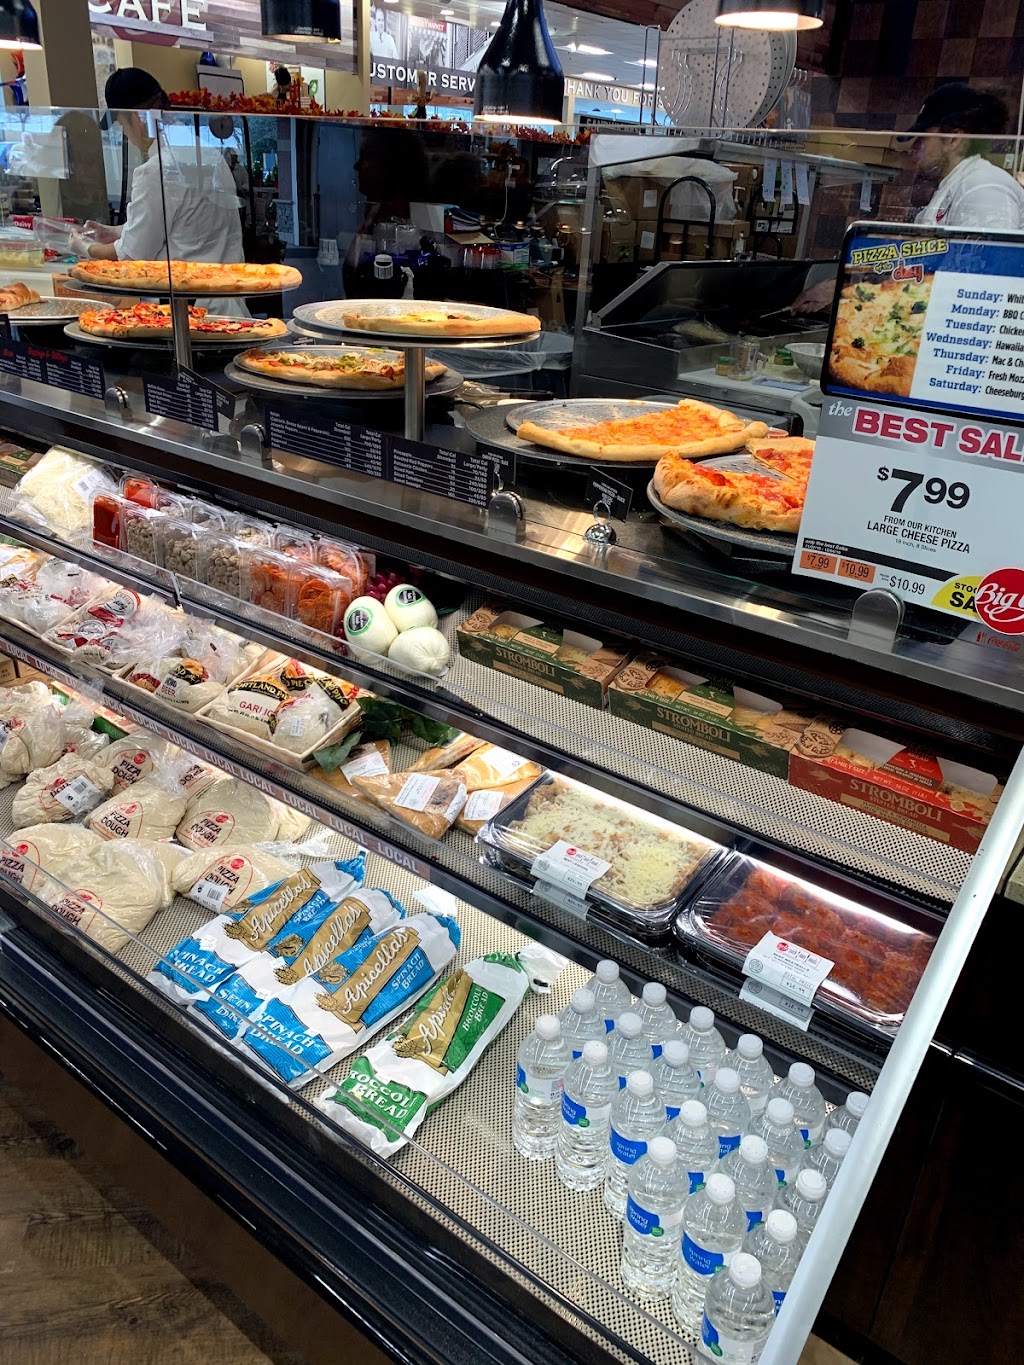 Big Y World Class Market | 656 New Haven Ave, Derby, CT 06418 | Phone: (203) 446-0049